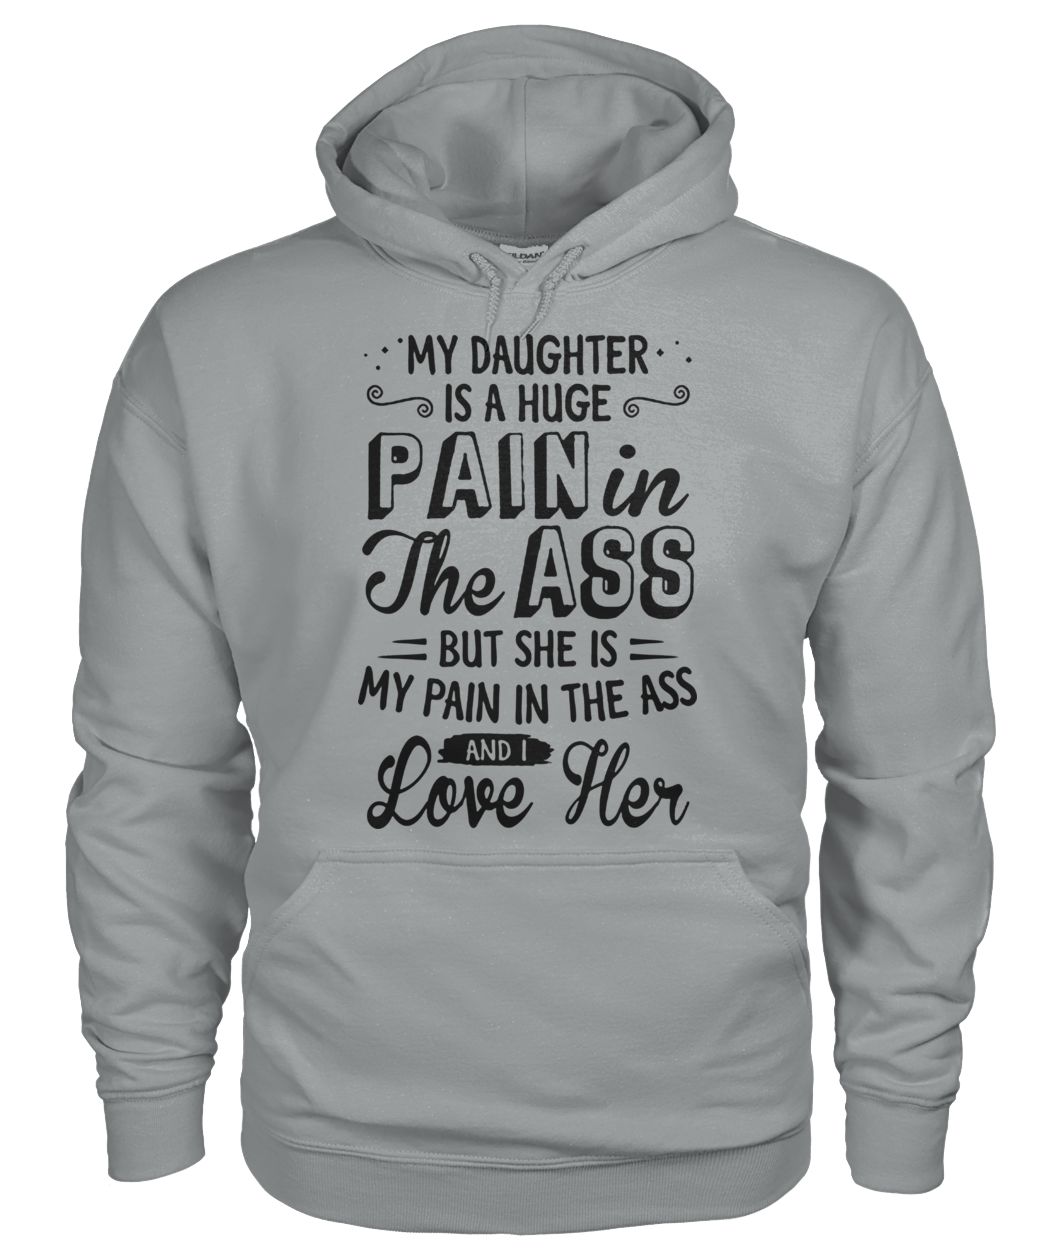 My daughter is a huge pain in the ass but she is my pain in the ass and I love her gildan hoodie